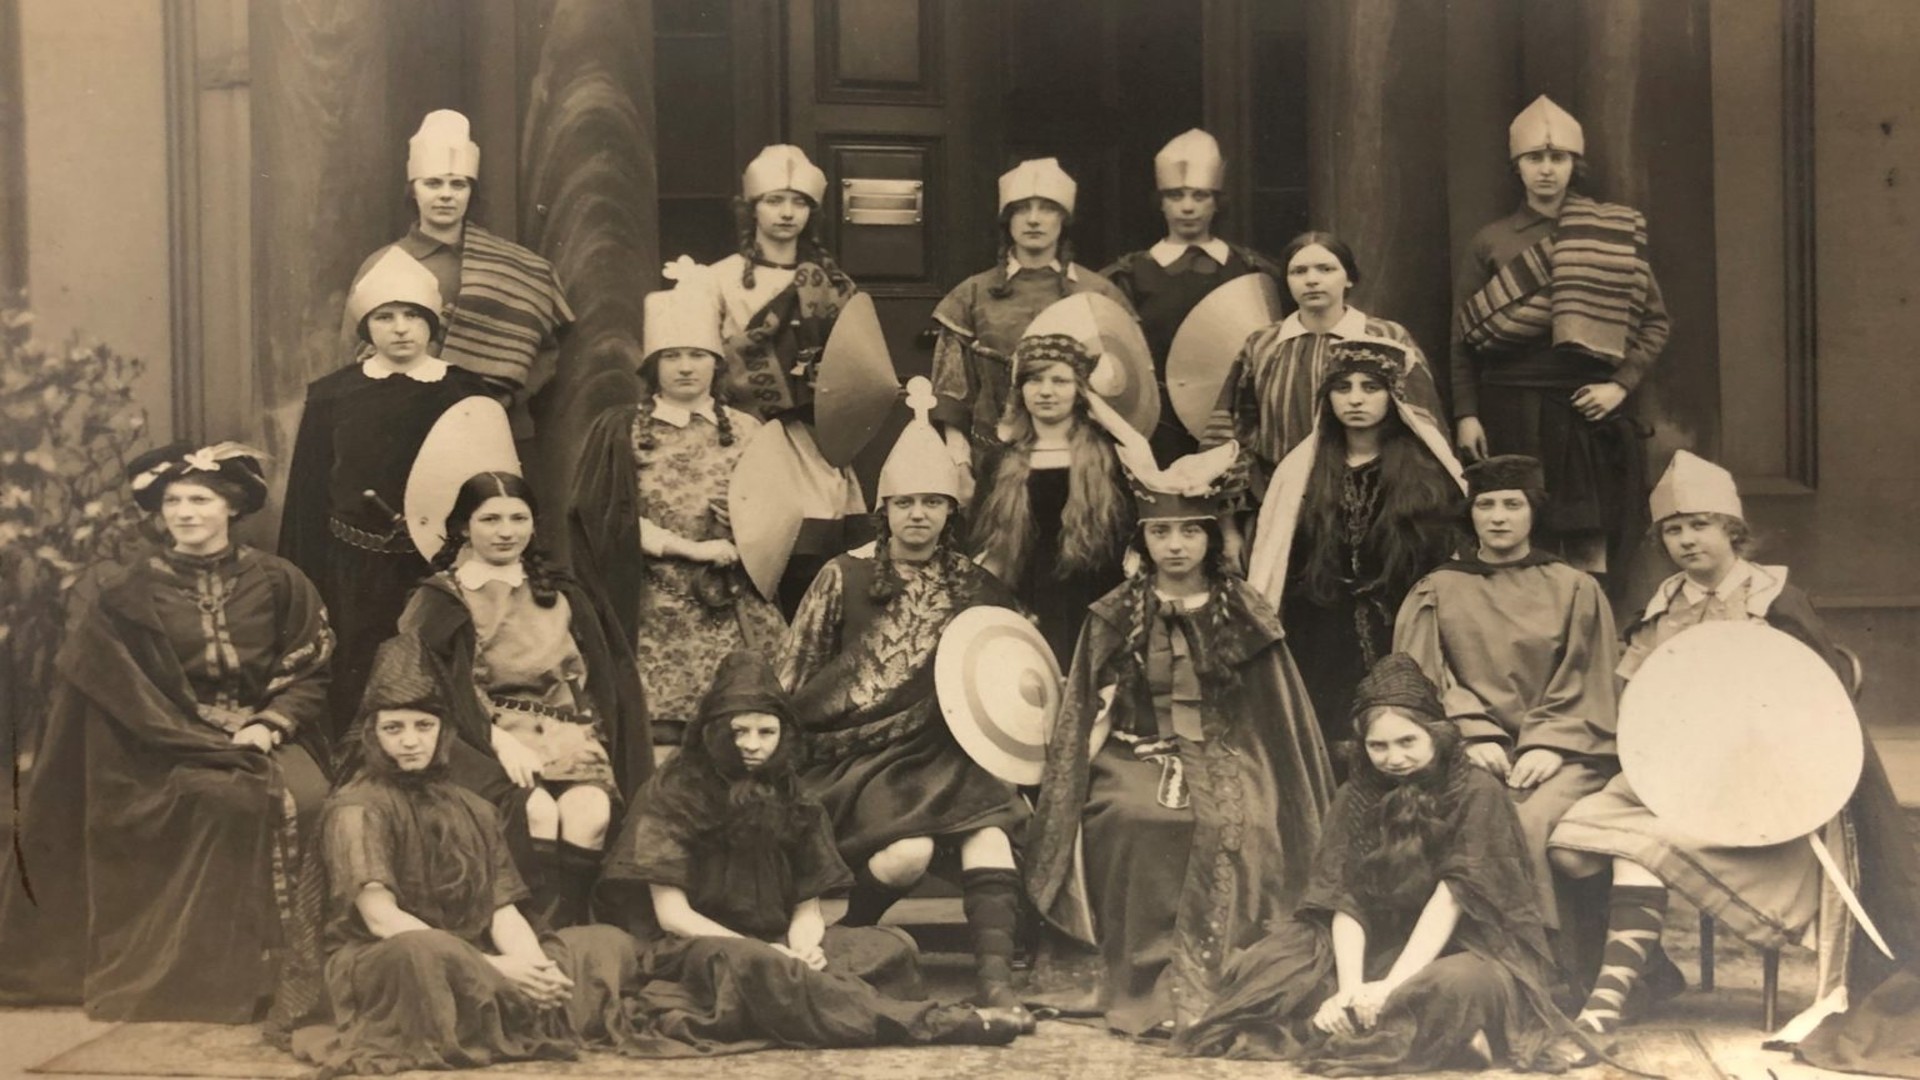 Historical, sepia toned photograph, 1914-1916. It shows a group of female students at Edge Hill College dressed in costume for a production of William Shakespeare's 'Macbeth'.